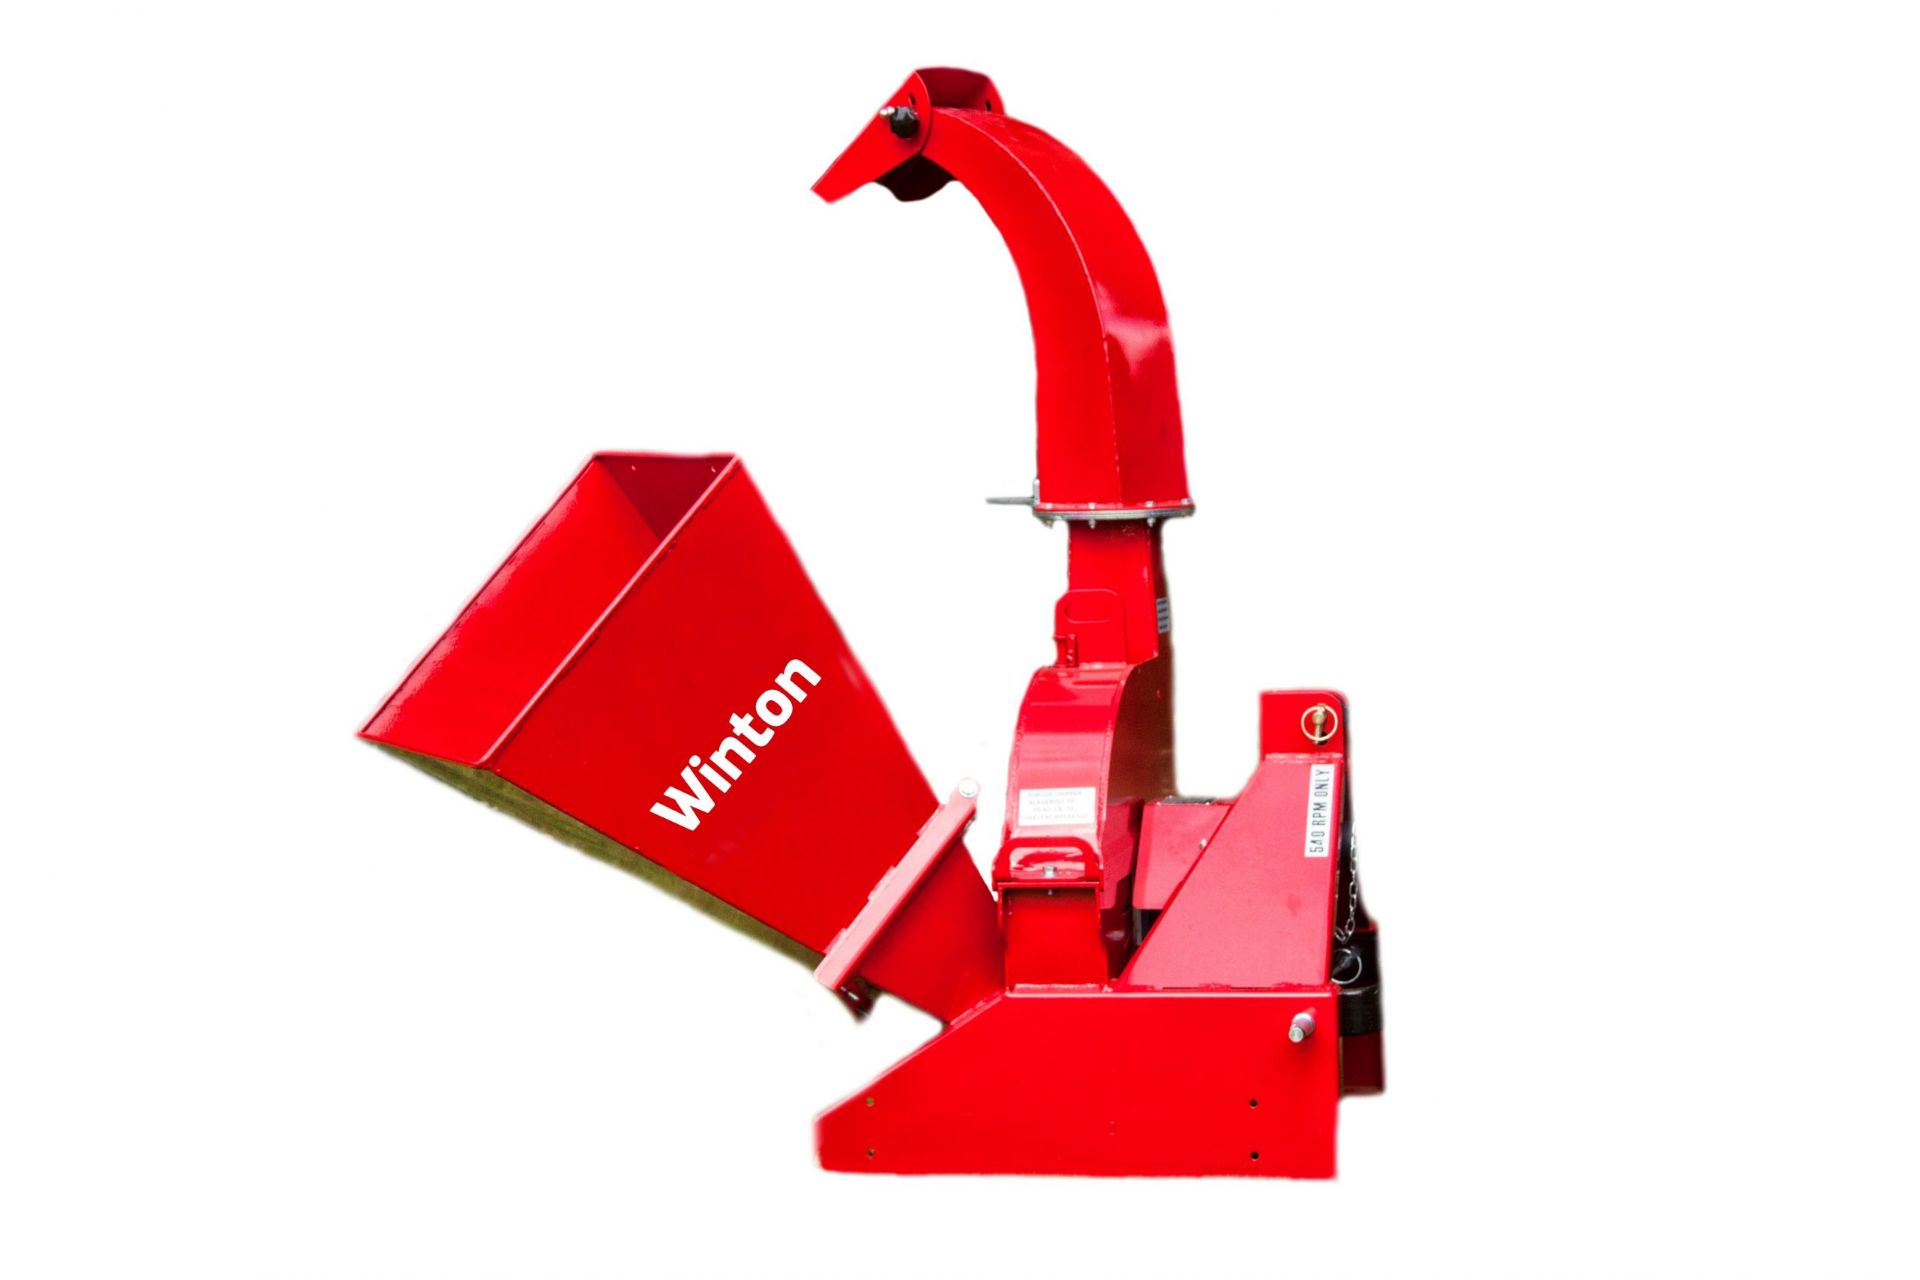 Winton 5″ Wood Chipper WWC - Image 3 of 3